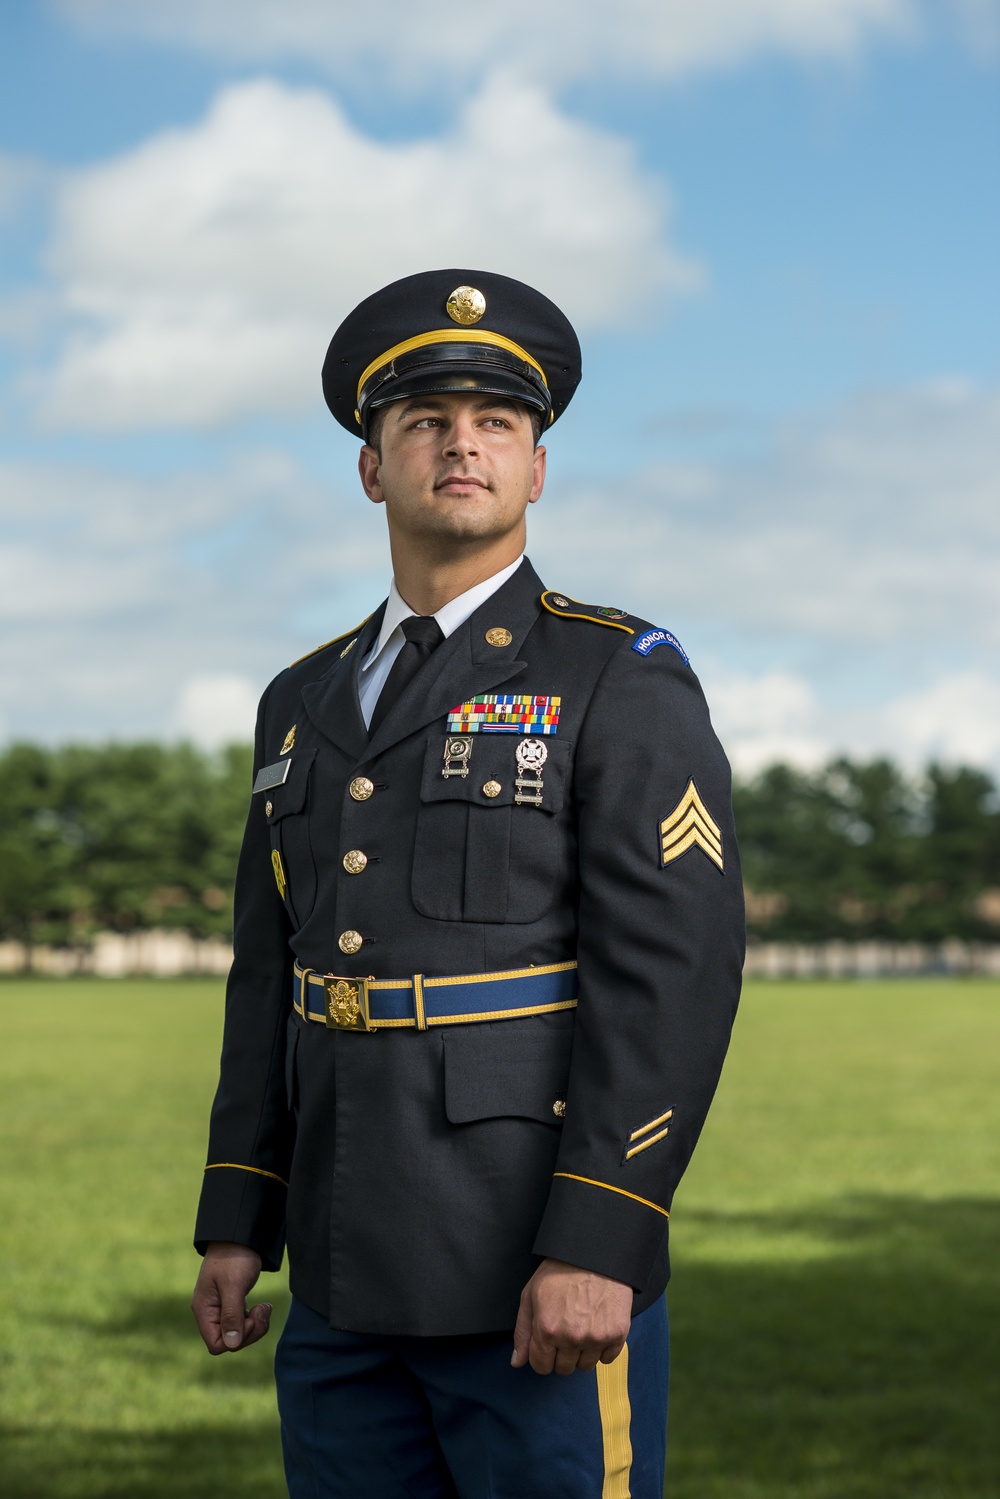 Fort Knox first to issue Army's new World War II-style uniforms | Article |  The United States Army